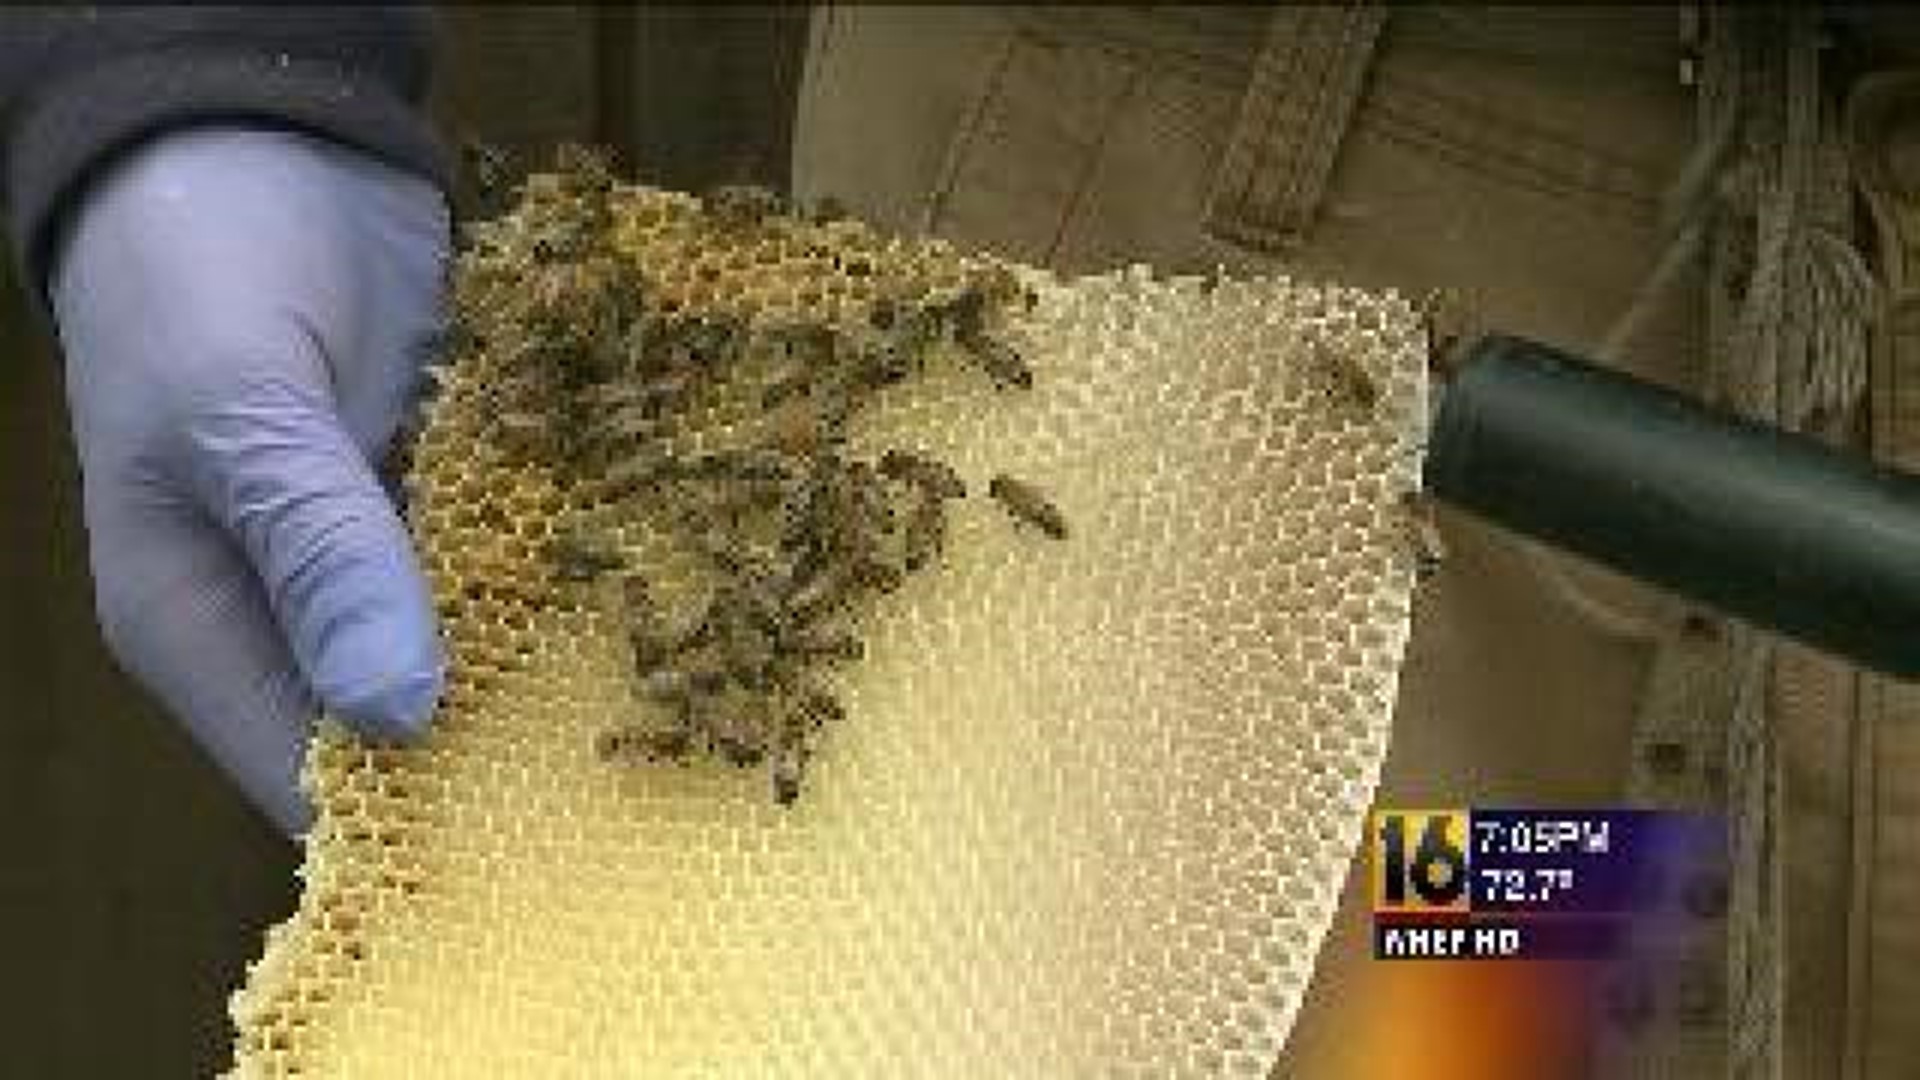 Park Officials Call in Expert to Remove Bees